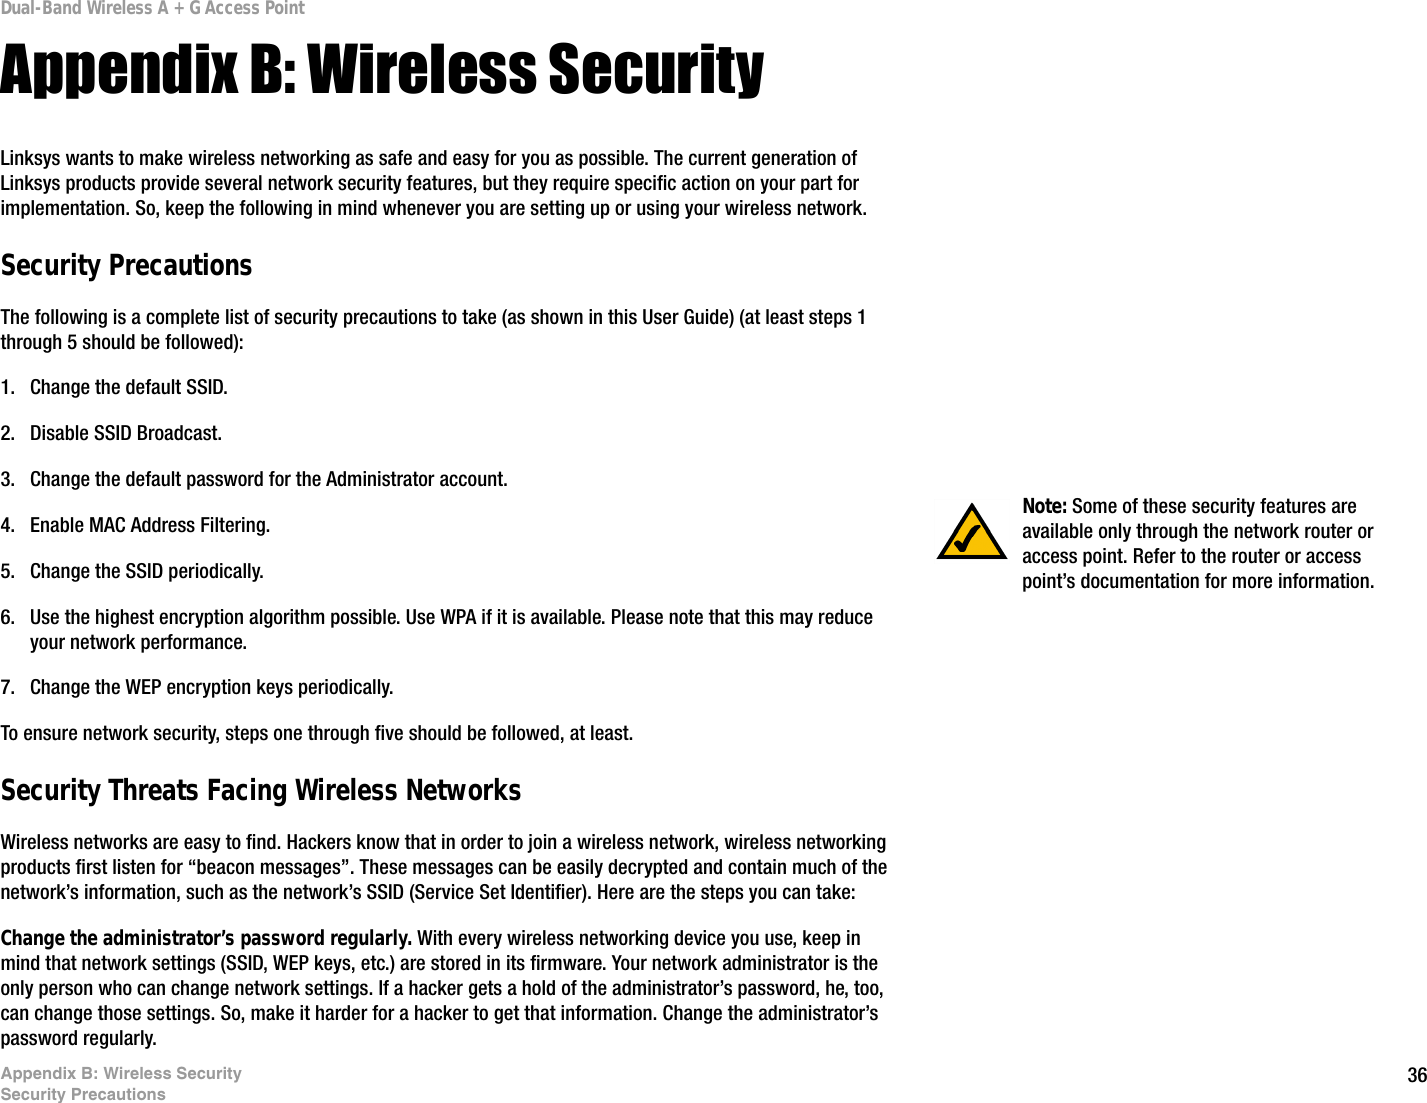 36Appendix B: Wireless SecuritySecurity PrecautionsDual-Band Wireless A + G Access PointAppendix B: Wireless SecurityLinksys wants to make wireless networking as safe and easy for you as possible. The current generation of Linksys products provide several network security features, but they require specific action on your part for implementation. So, keep the following in mind whenever you are setting up or using your wireless network.Security PrecautionsThe following is a complete list of security precautions to take (as shown in this User Guide) (at least steps 1 through 5 should be followed):1. Change the default SSID. 2. Disable SSID Broadcast. 3. Change the default password for the Administrator account. 4. Enable MAC Address Filtering. 5. Change the SSID periodically. 6. Use the highest encryption algorithm possible. Use WPA if it is available. Please note that this may reduce your network performance. 7. Change the WEP encryption keys periodically. To ensure network security, steps one through five should be followed, at least.Security Threats Facing Wireless Networks Wireless networks are easy to find. Hackers know that in order to join a wireless network, wireless networking products first listen for “beacon messages”. These messages can be easily decrypted and contain much of the network’s information, such as the network’s SSID (Service Set Identifier). Here are the steps you can take:Change the administrator’s password regularly. With every wireless networking device you use, keep in mind that network settings (SSID, WEP keys, etc.) are stored in its firmware. Your network administrator is the only person who can change network settings. If a hacker gets a hold of the administrator’s password, he, too, can change those settings. So, make it harder for a hacker to get that information. Change the administrator’s password regularly.Note: Some of these security features are available only through the network router or access point. Refer to the router or access point’s documentation for more information.